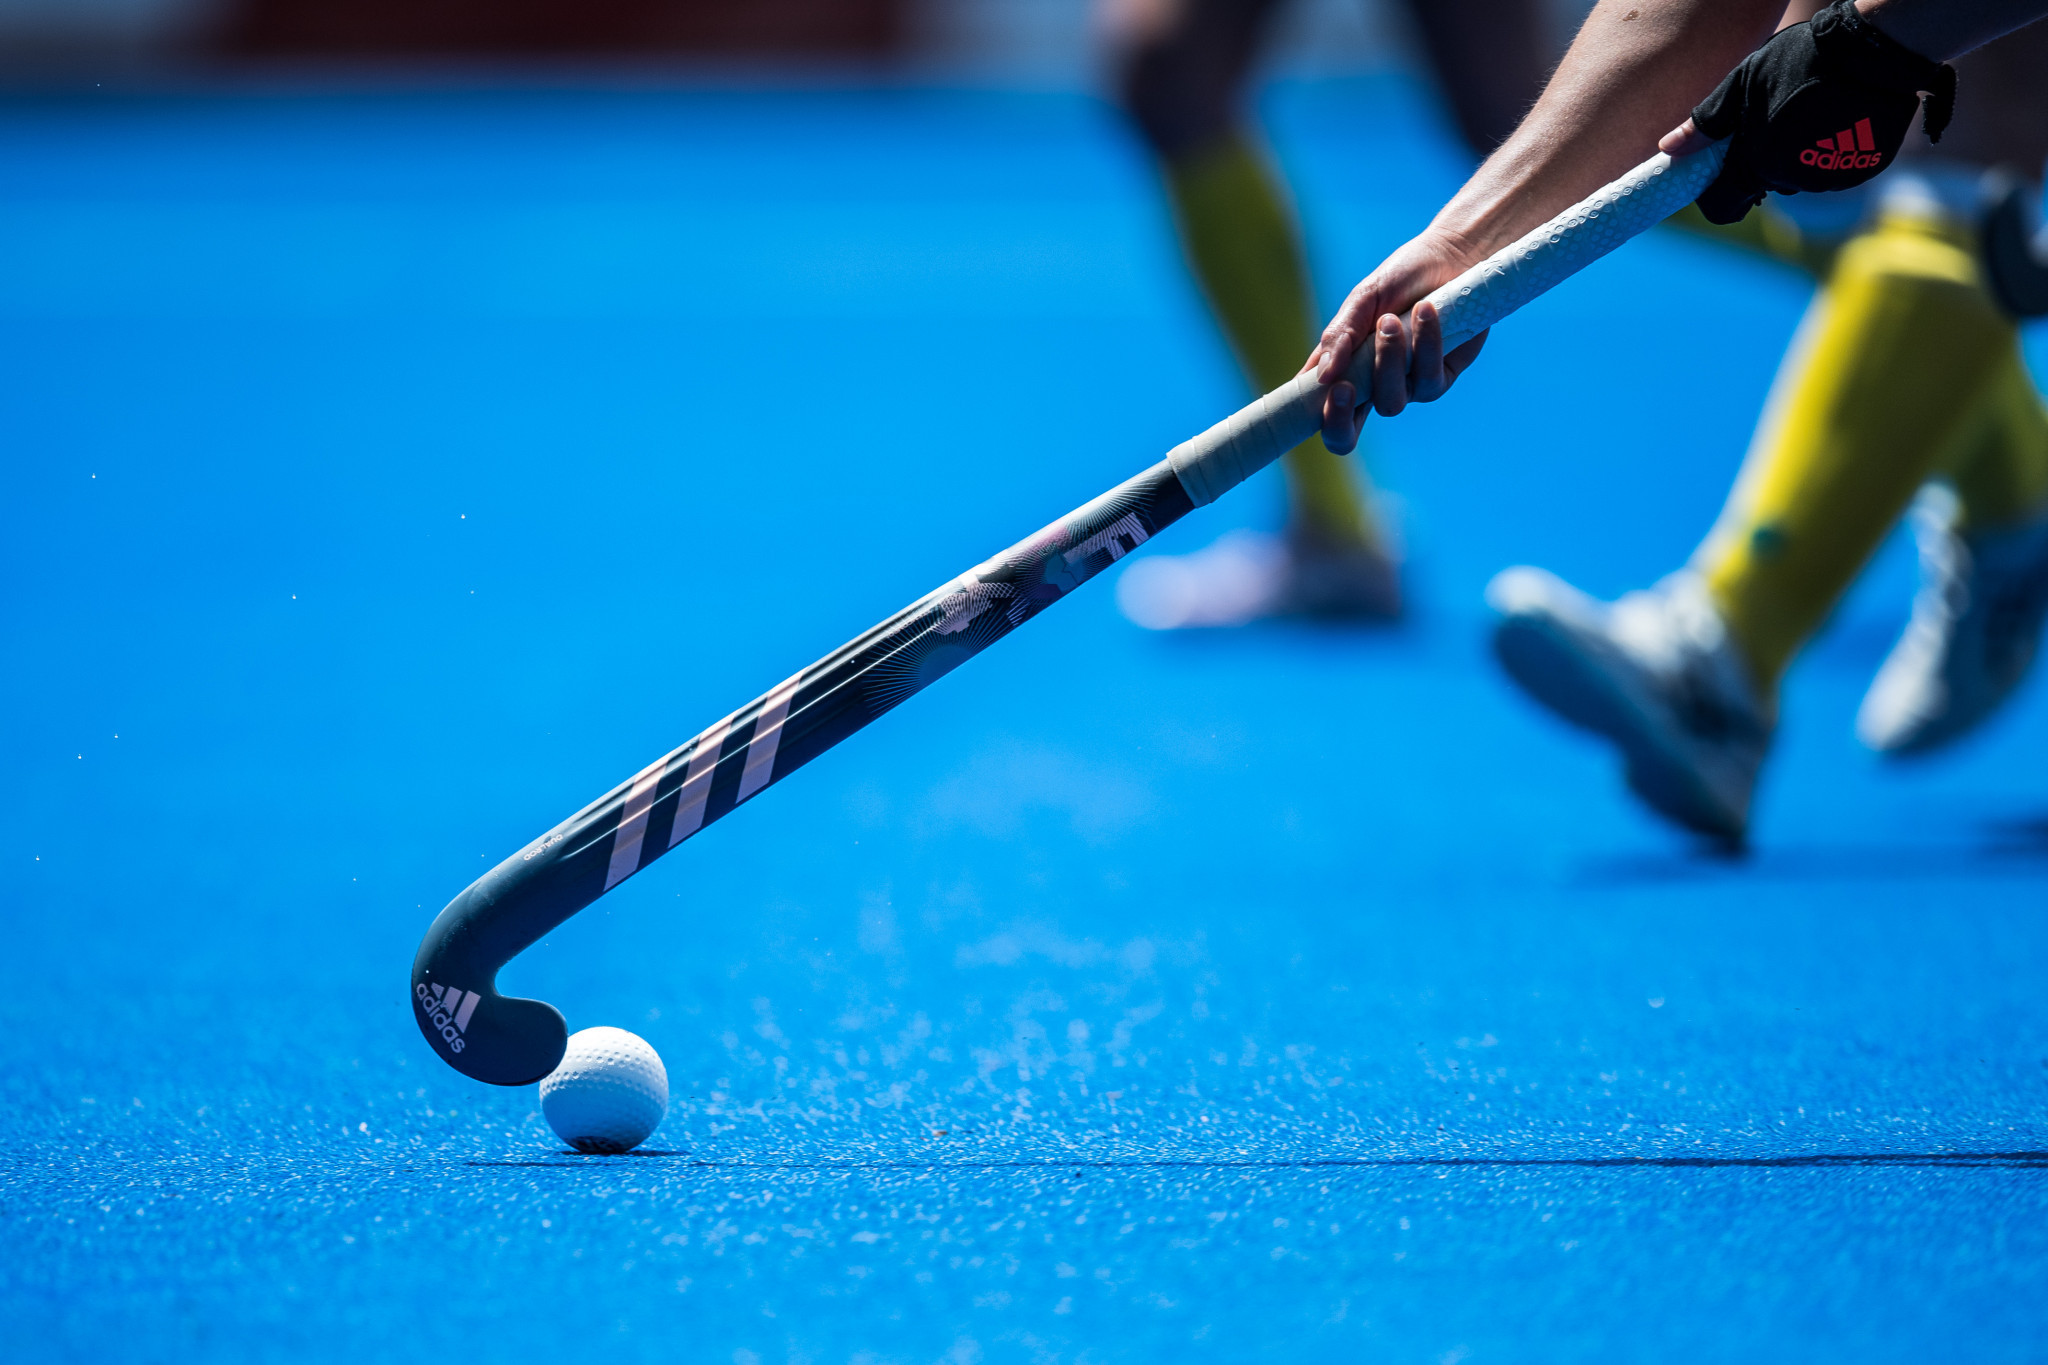 FIH to implement "concrete measures" in new development project